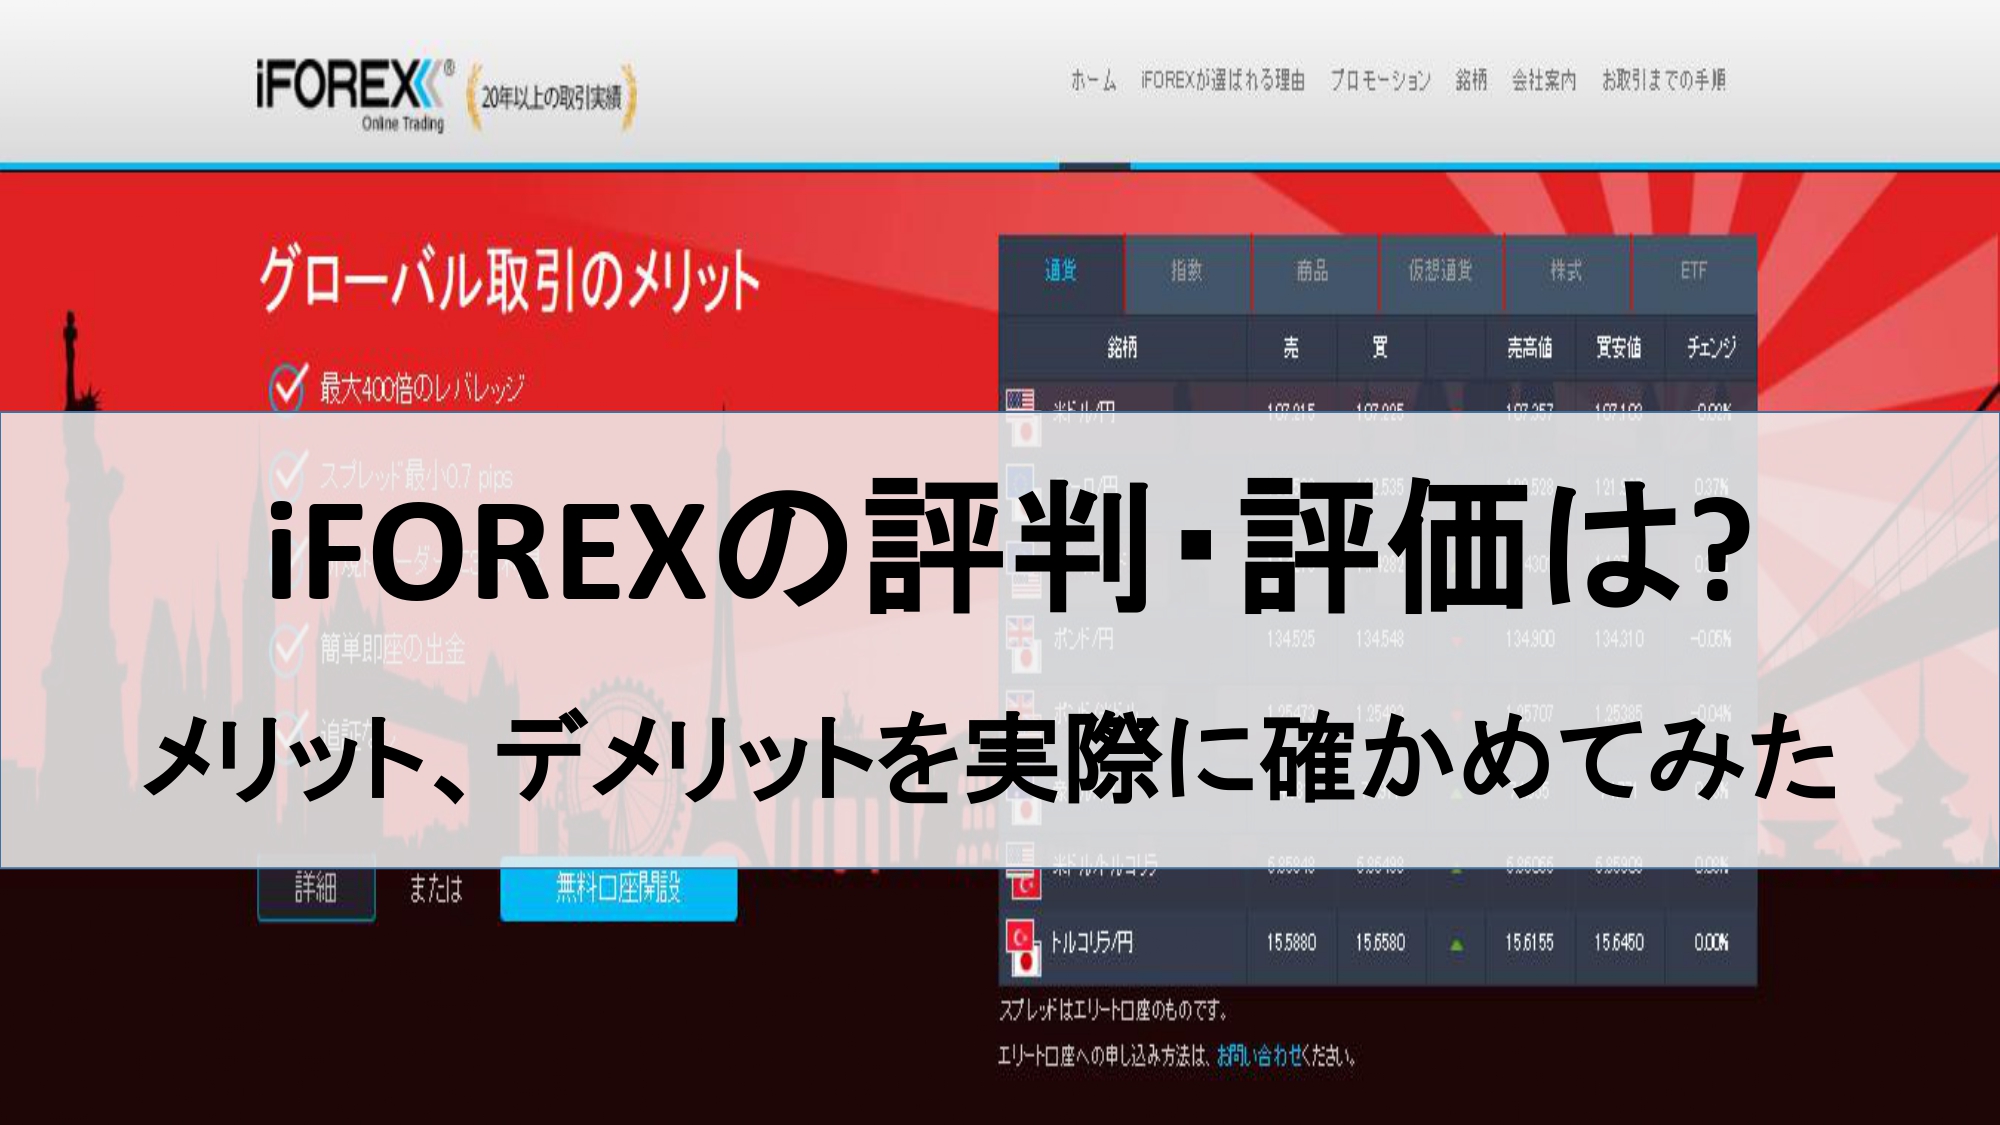 iFOREX(アイフォレックス)の評判・評価